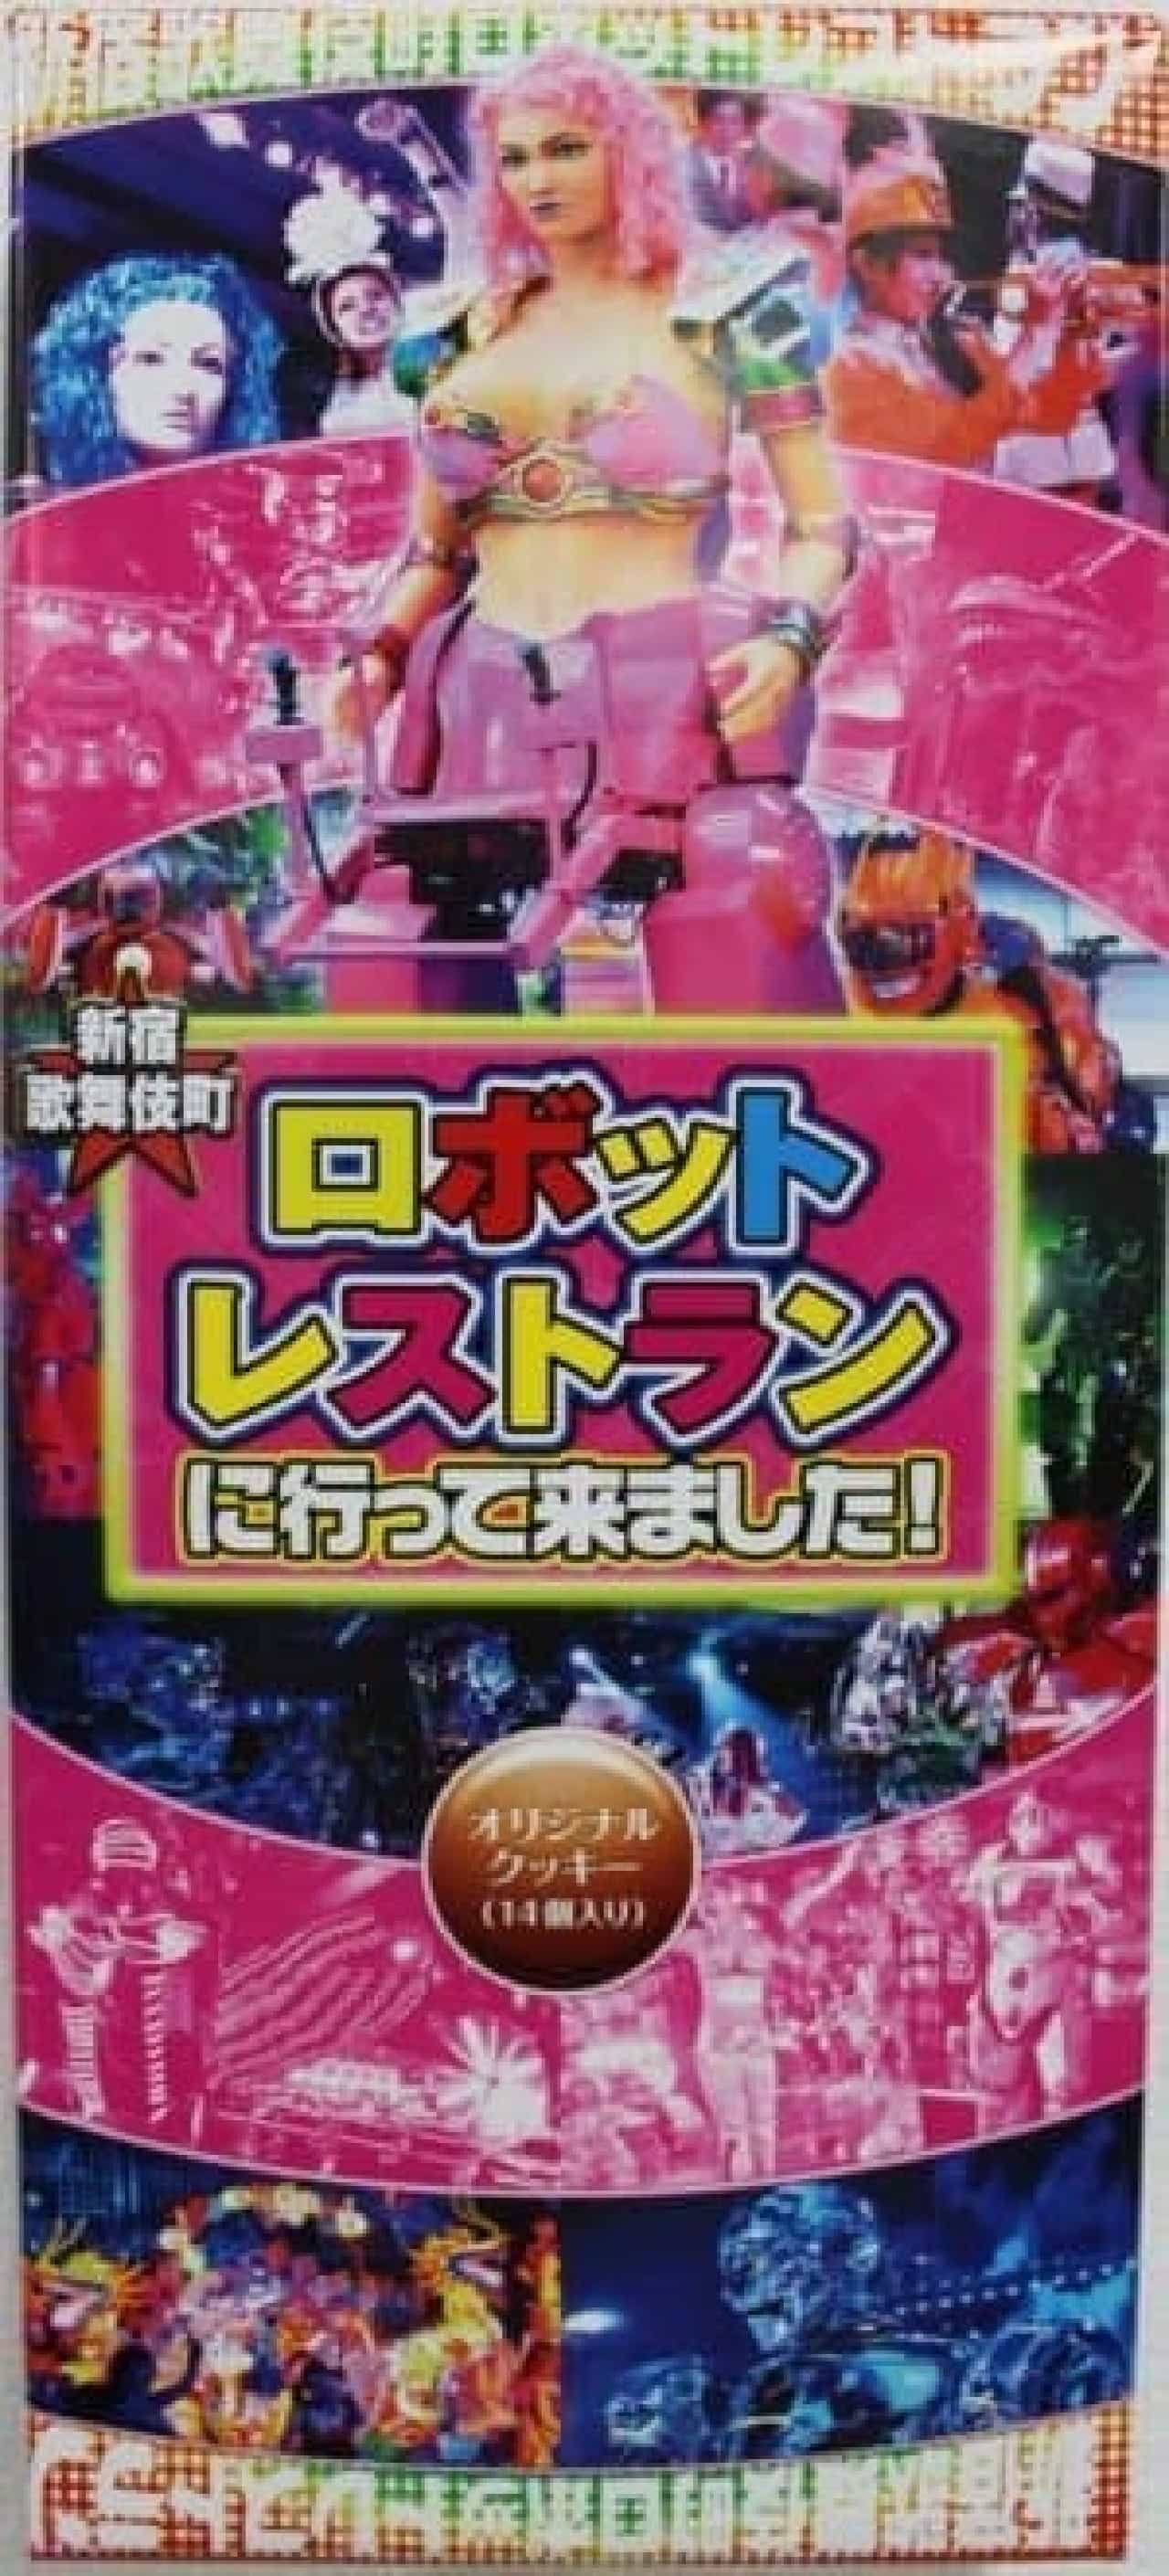 A package that clearly shows that you went to a robot restaurant